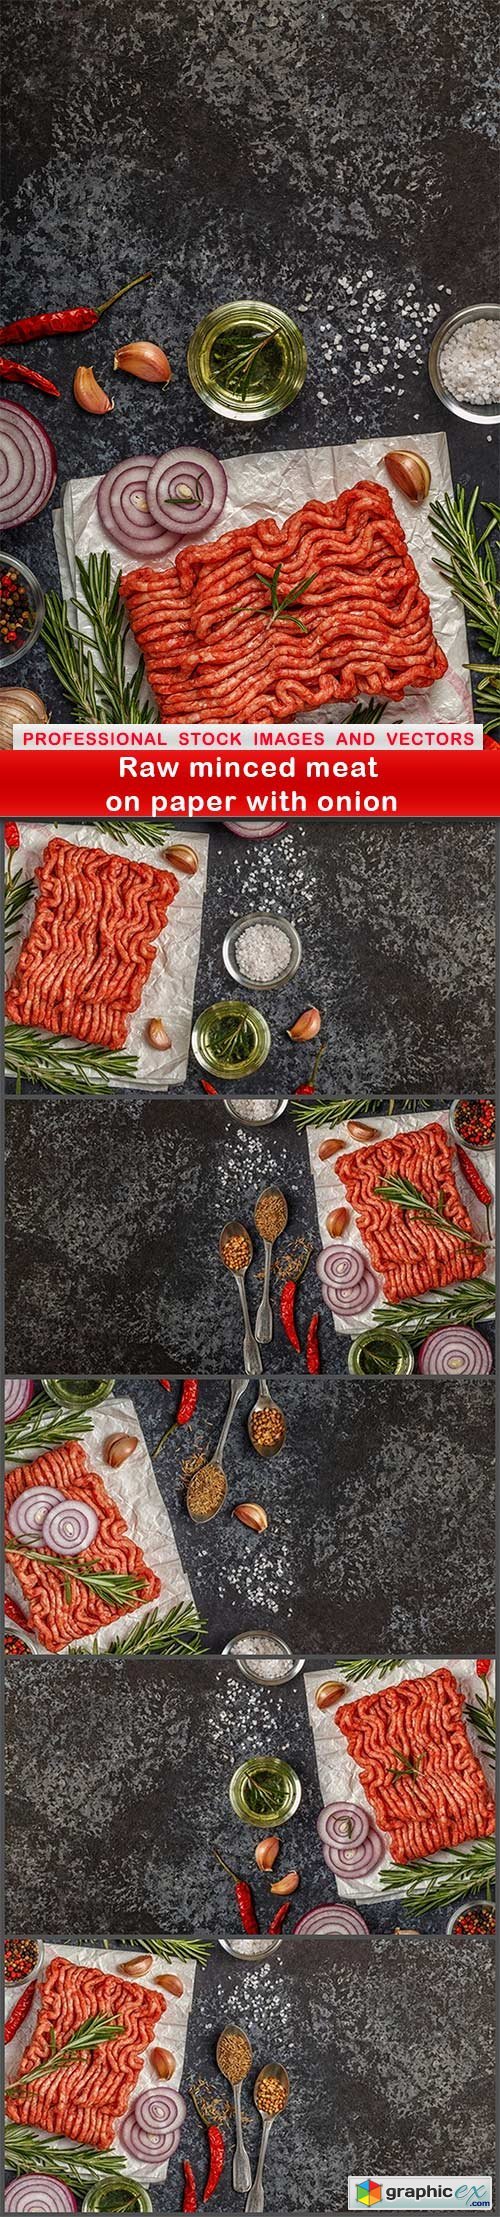 Raw minced meat on paper with onion - 6 UHQ JPEG